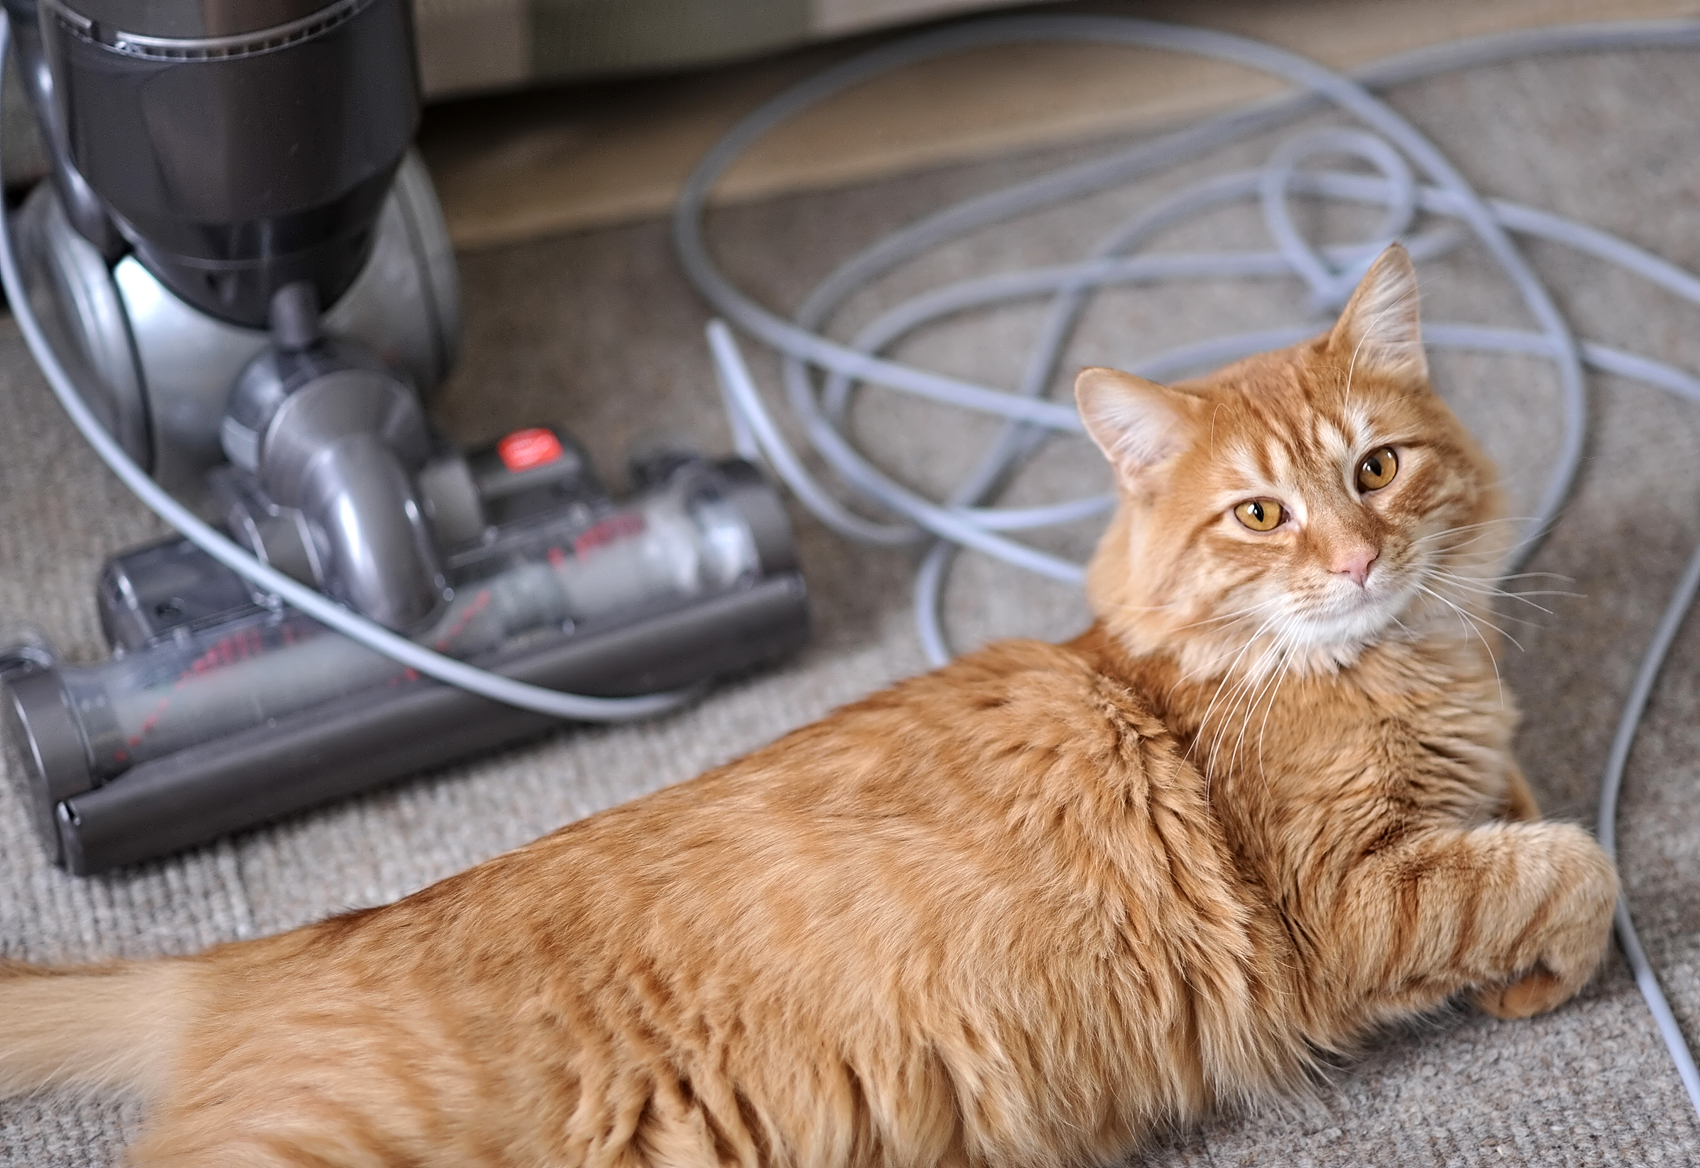 If your carpet is covered in cat hair, you need to know this squeegee trick for removing pet hair.